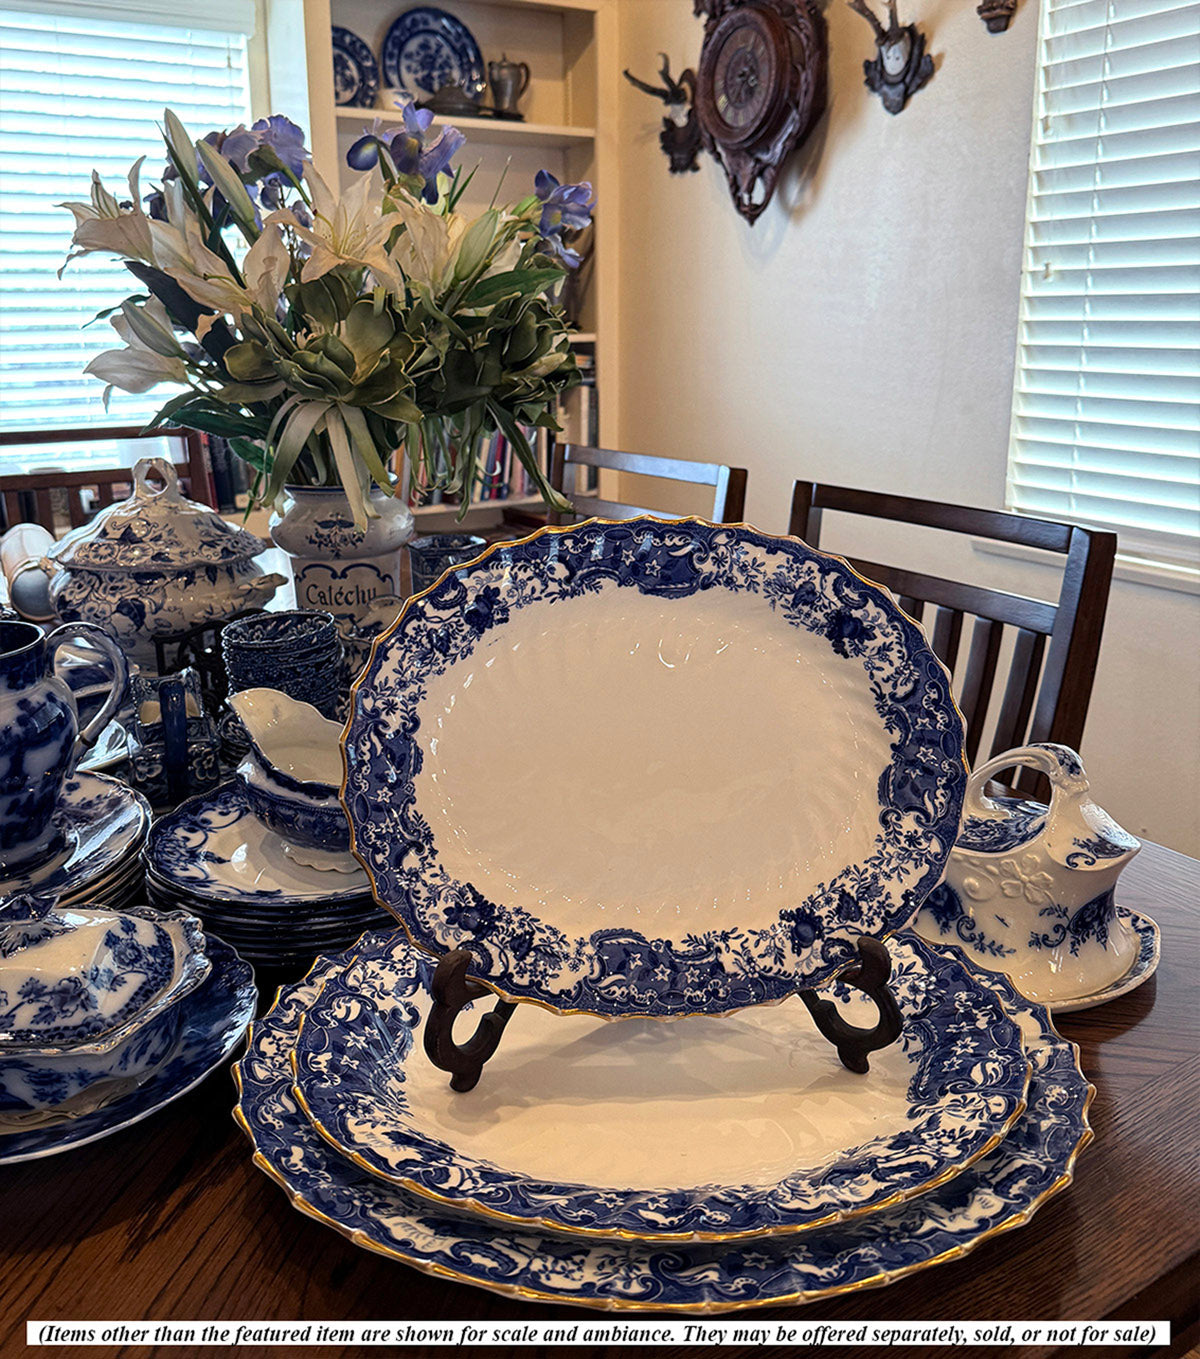 RARE Matching Set of 3 Large c.1890 English Flow Blue Transferware Platters, by Copeland (Spode) "May"